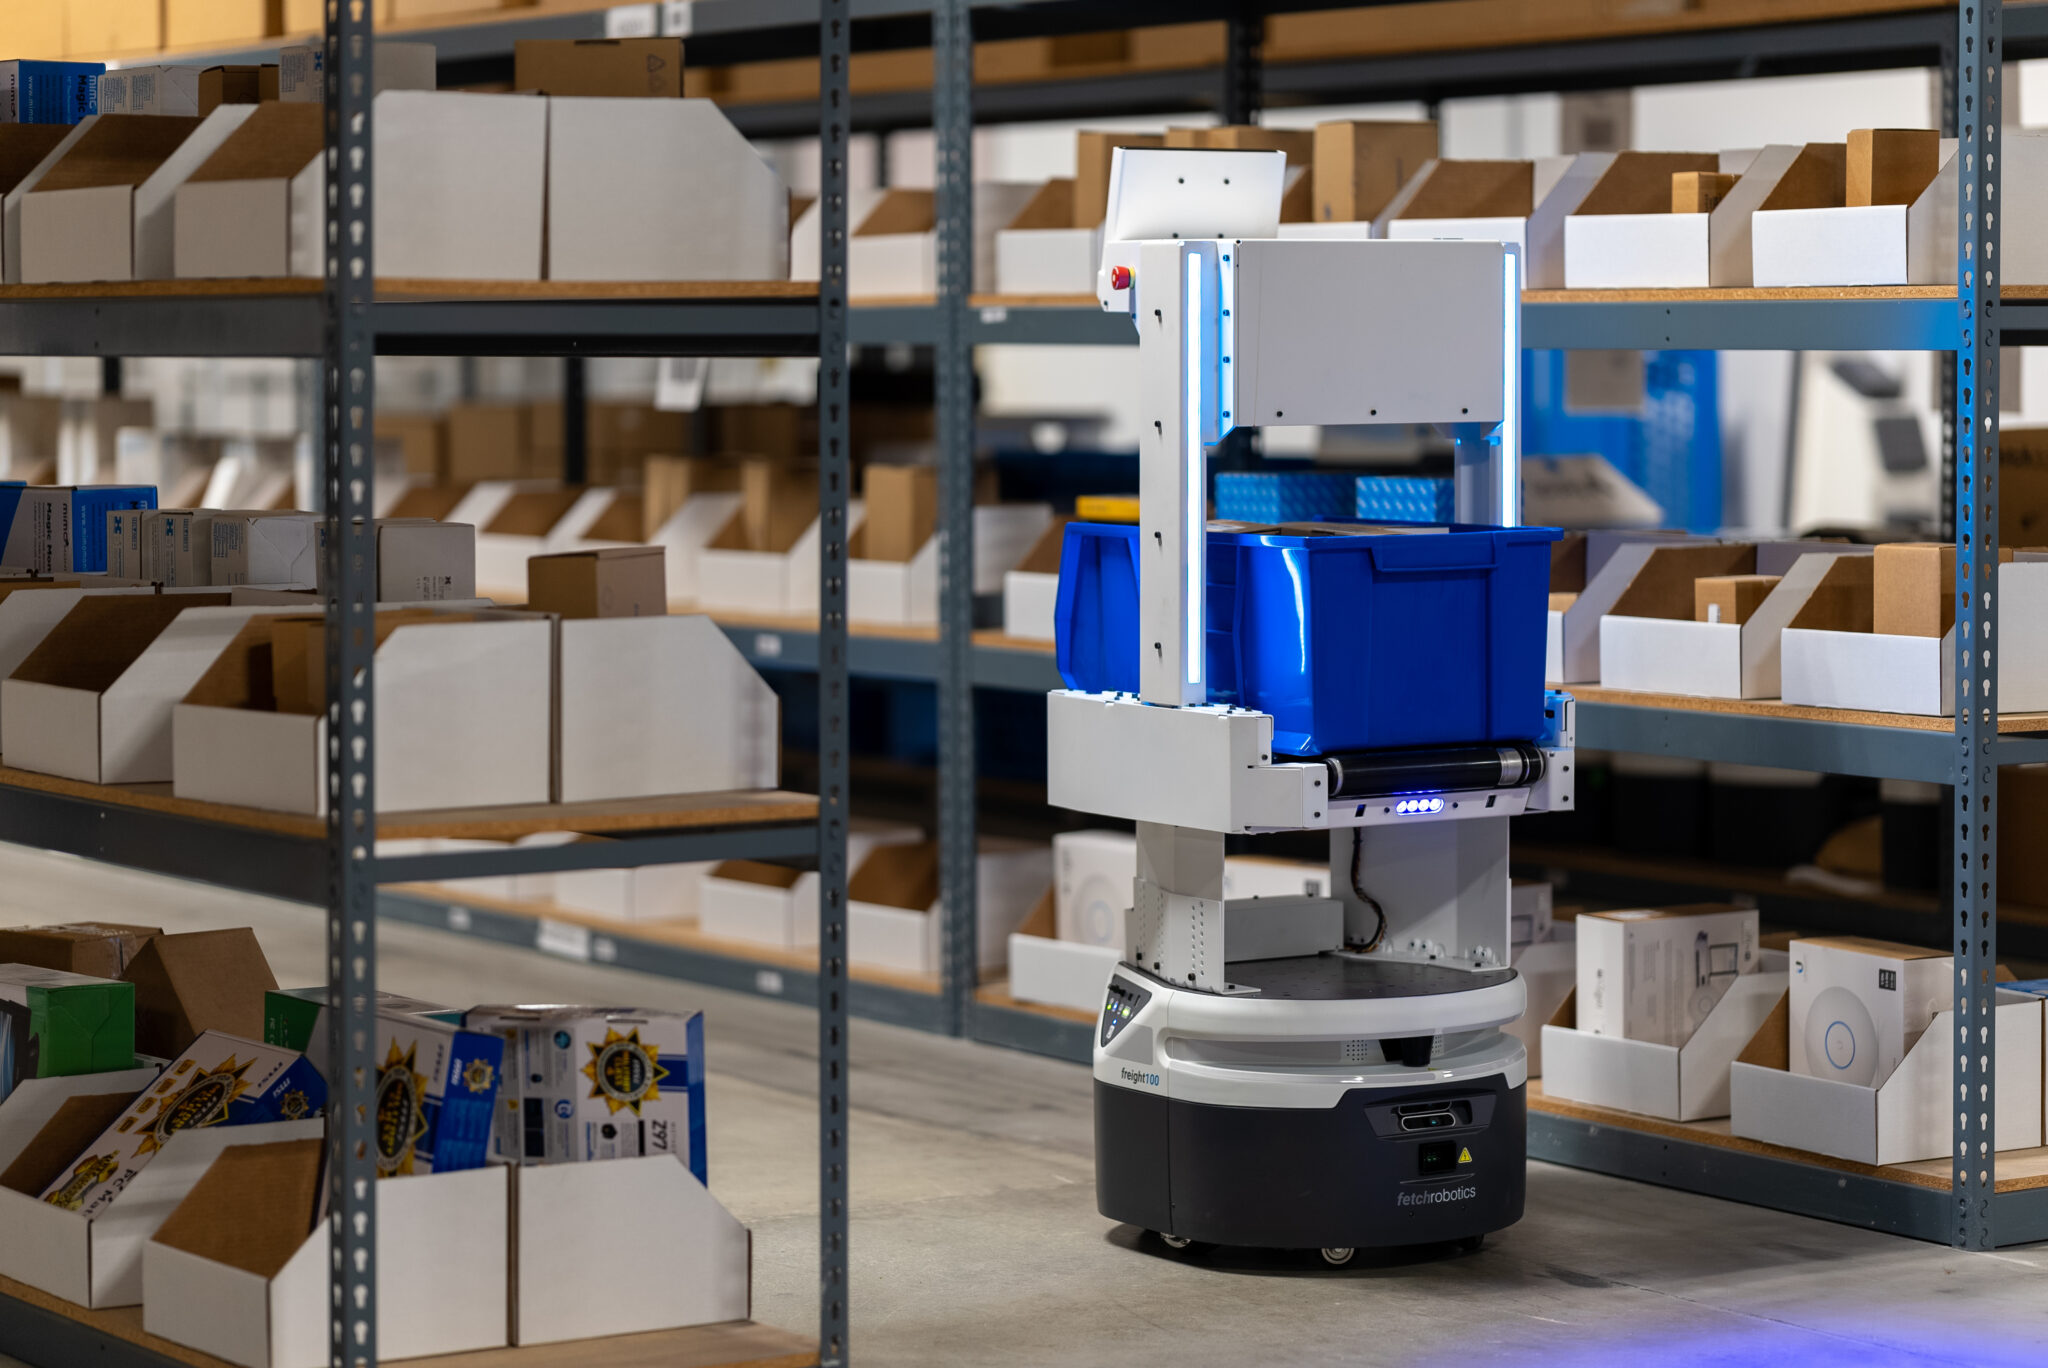 [Barcom, Inc.] The Human Element in Automated Warehouses: Upskilling and Collaboration with Technology